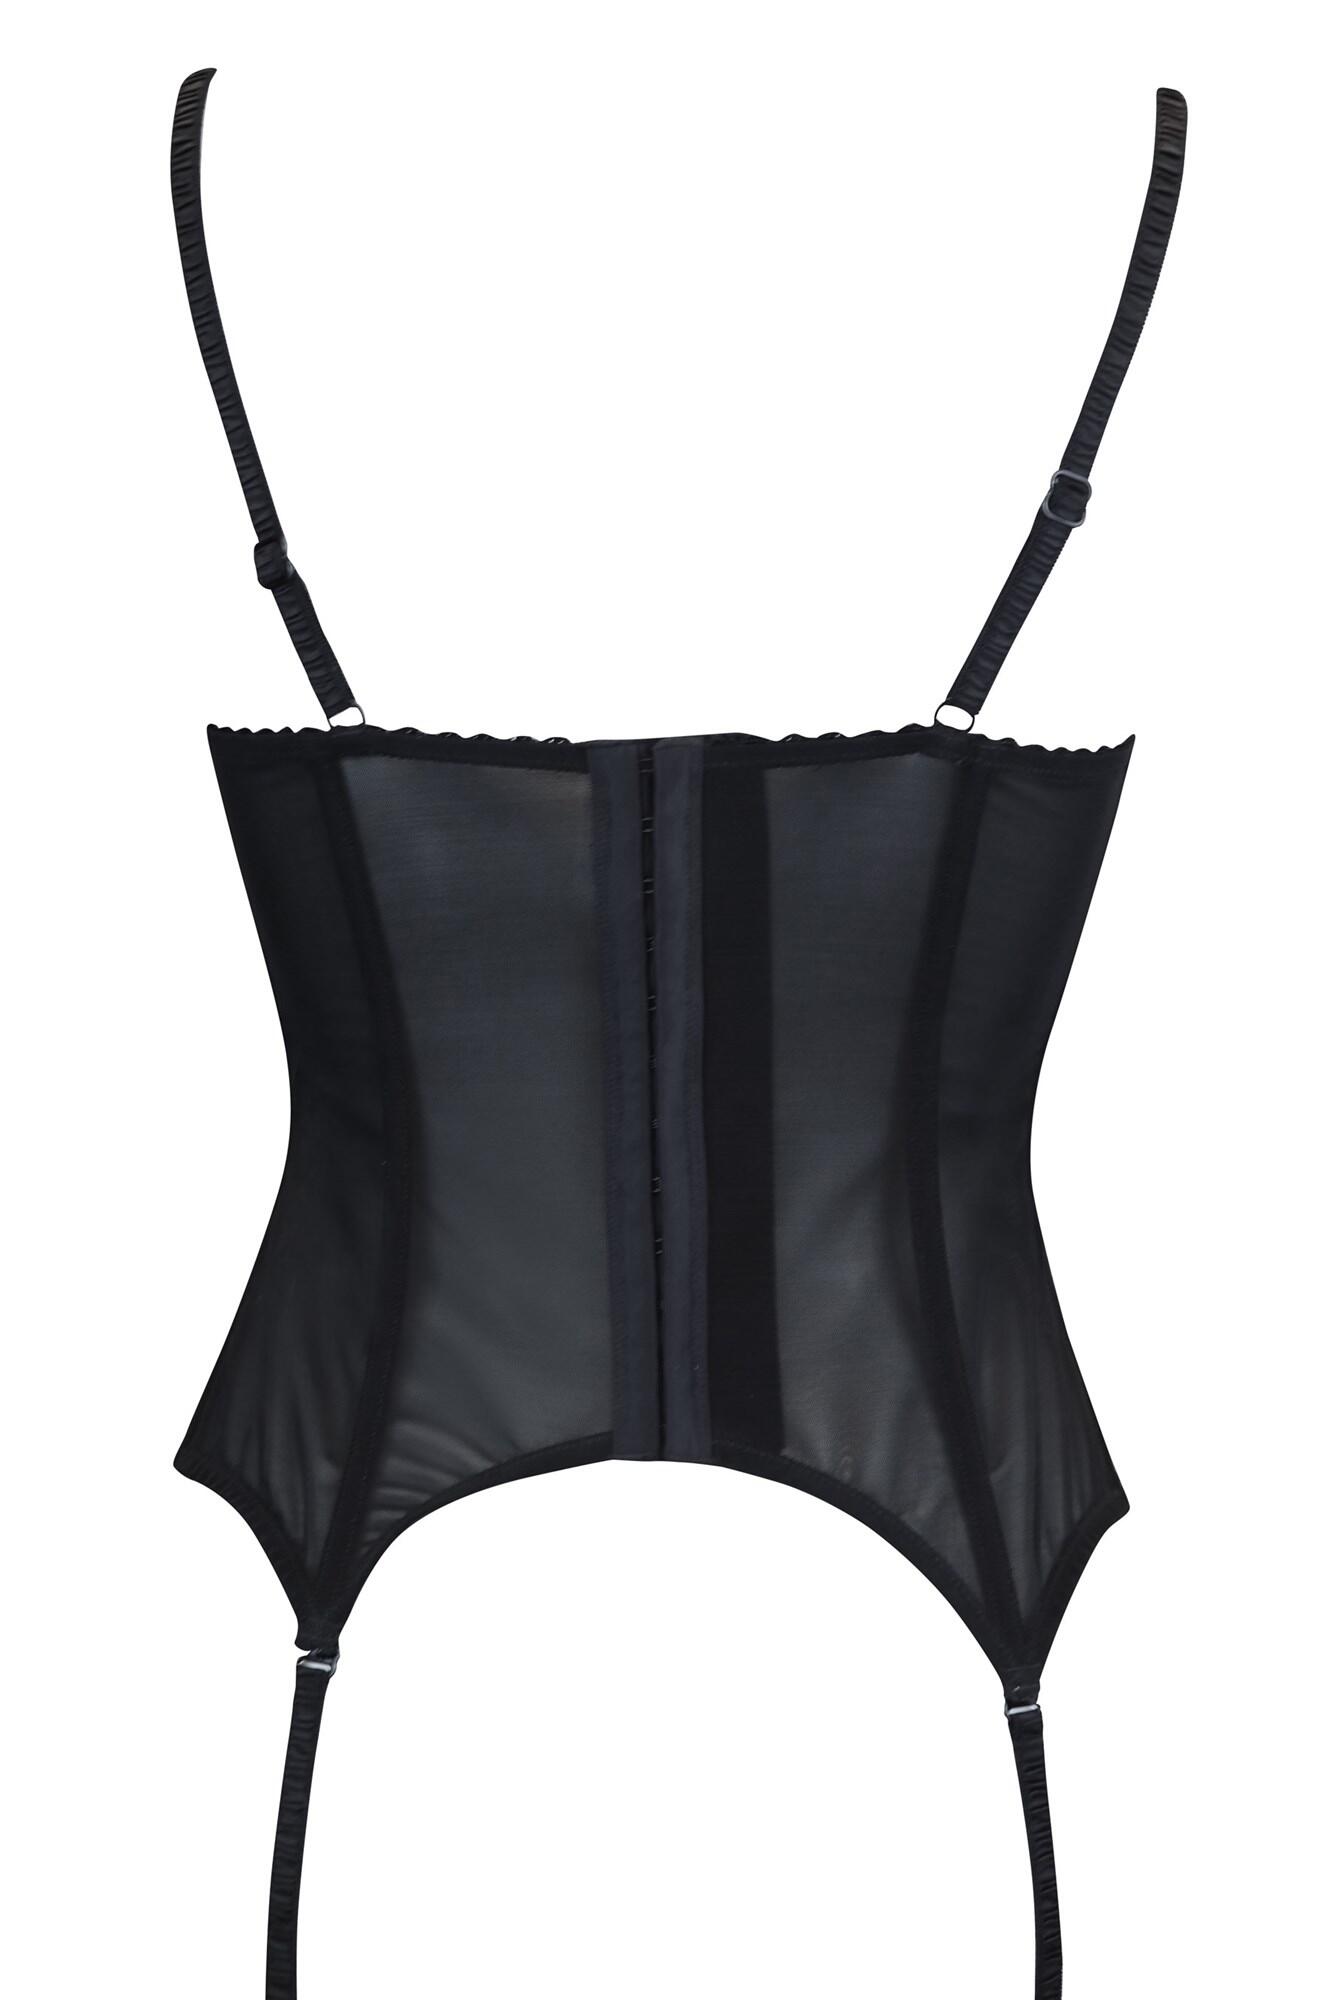 Playful Promises Fallon Black Basque at The Hosiery Box Basques and  Suspenders